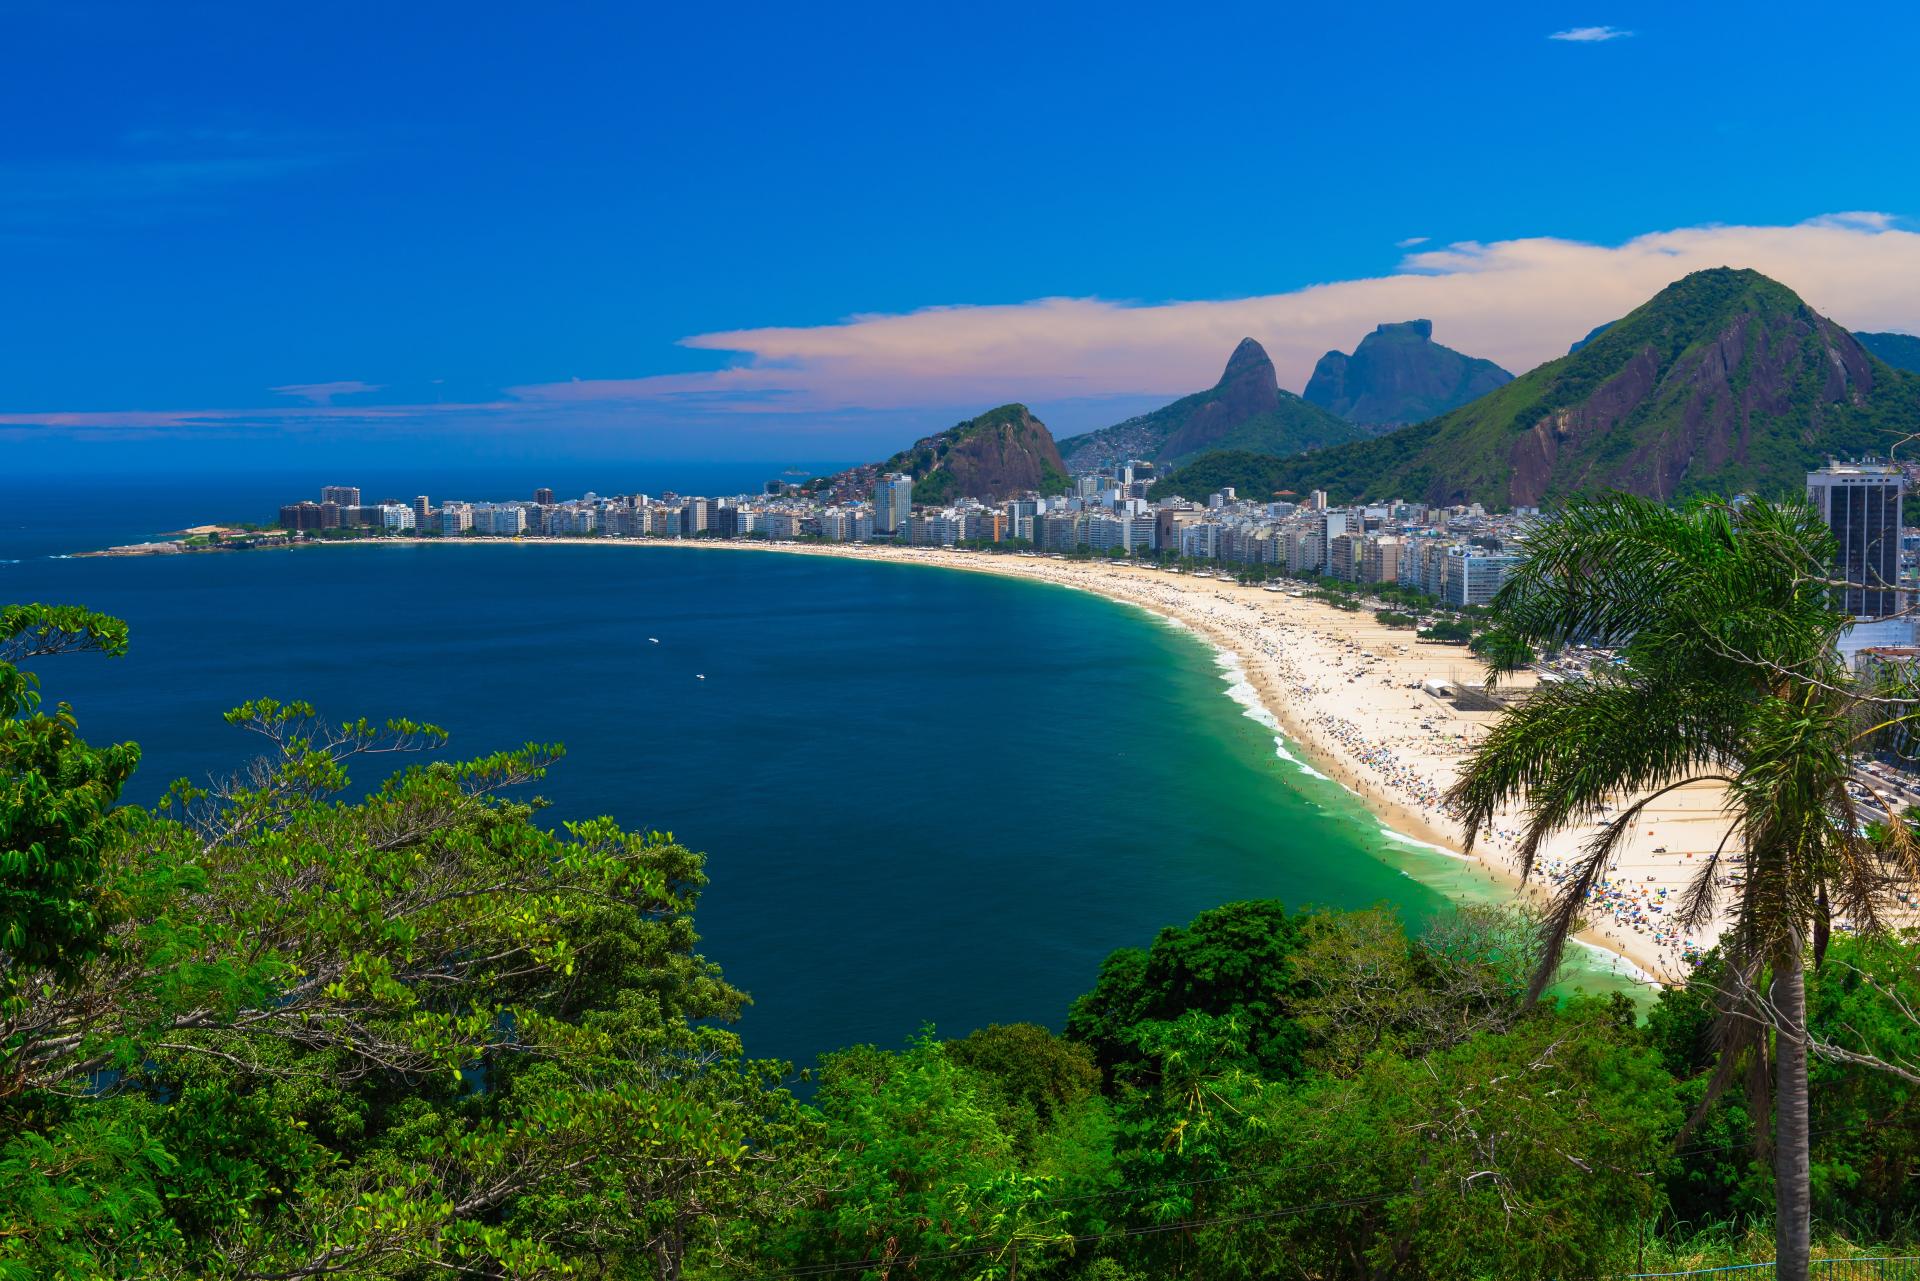 Rio is a highlight in Brazil